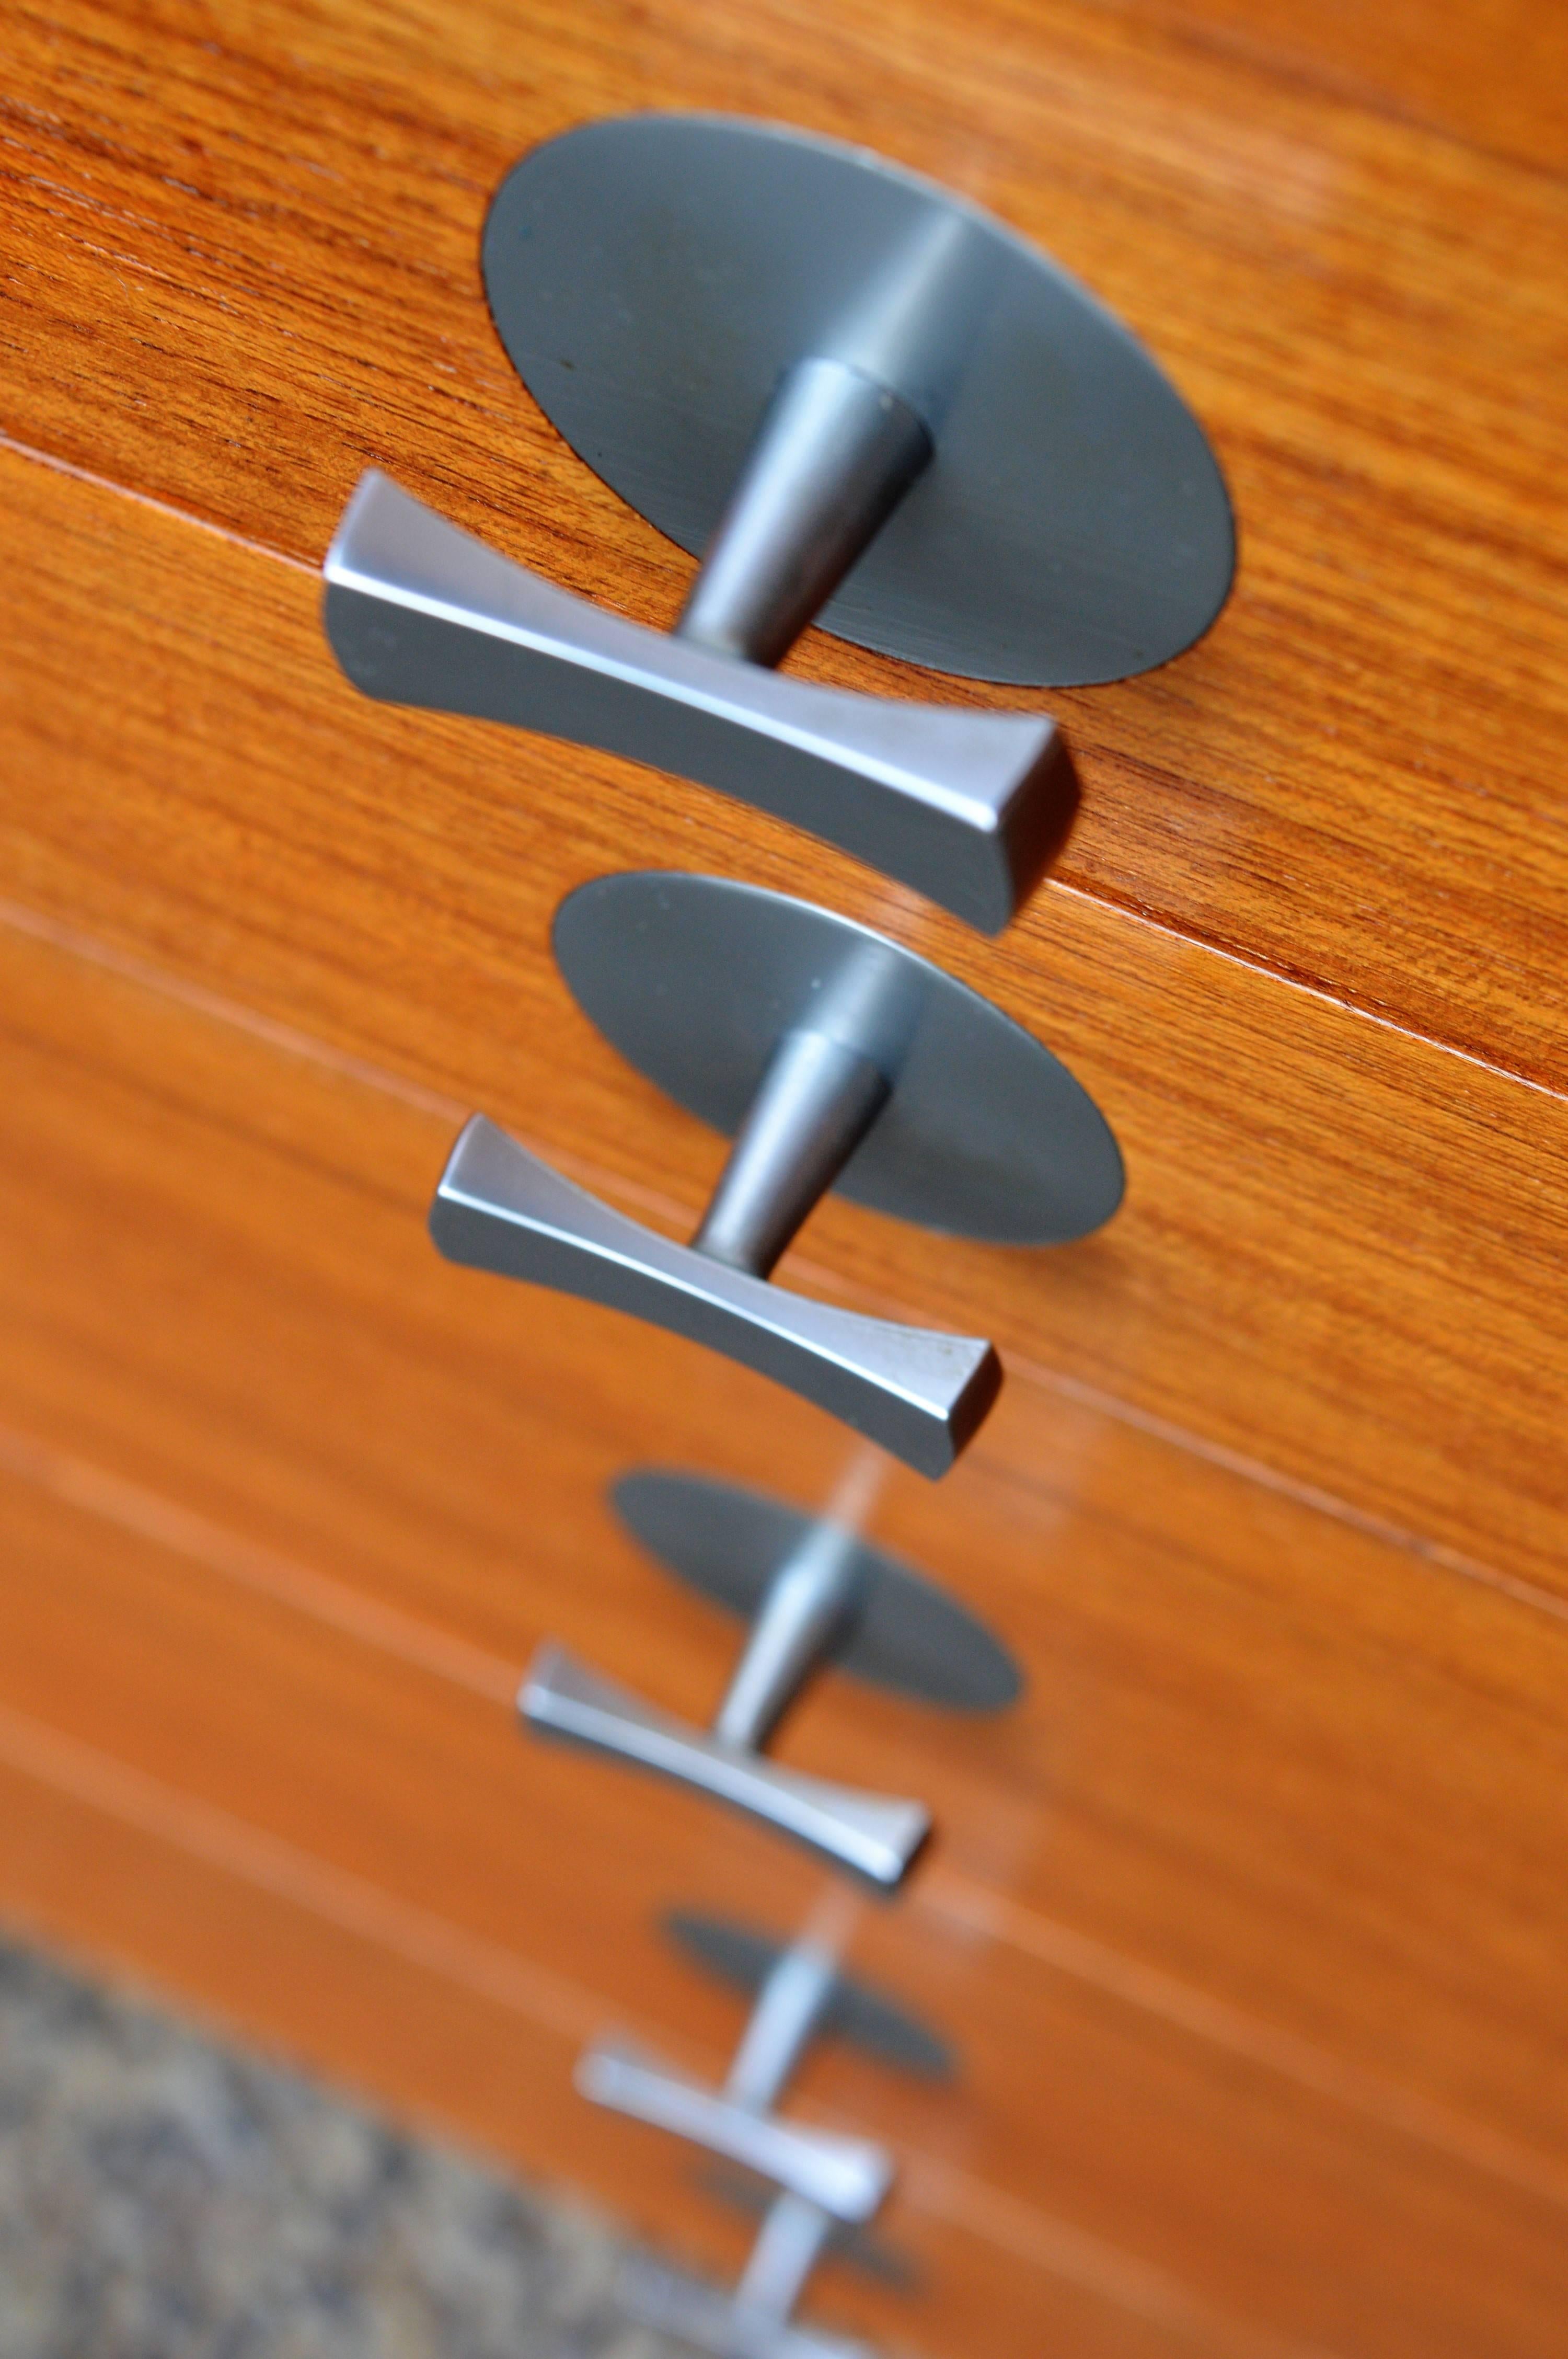 This exquisite piece is a rare design by Finn Juhl for France & Son and features his iconic bow-tie chrome door and drawer pulls and is part of the Cresco Series. Extremely well designed with top quality hardware throughout - the hinges are